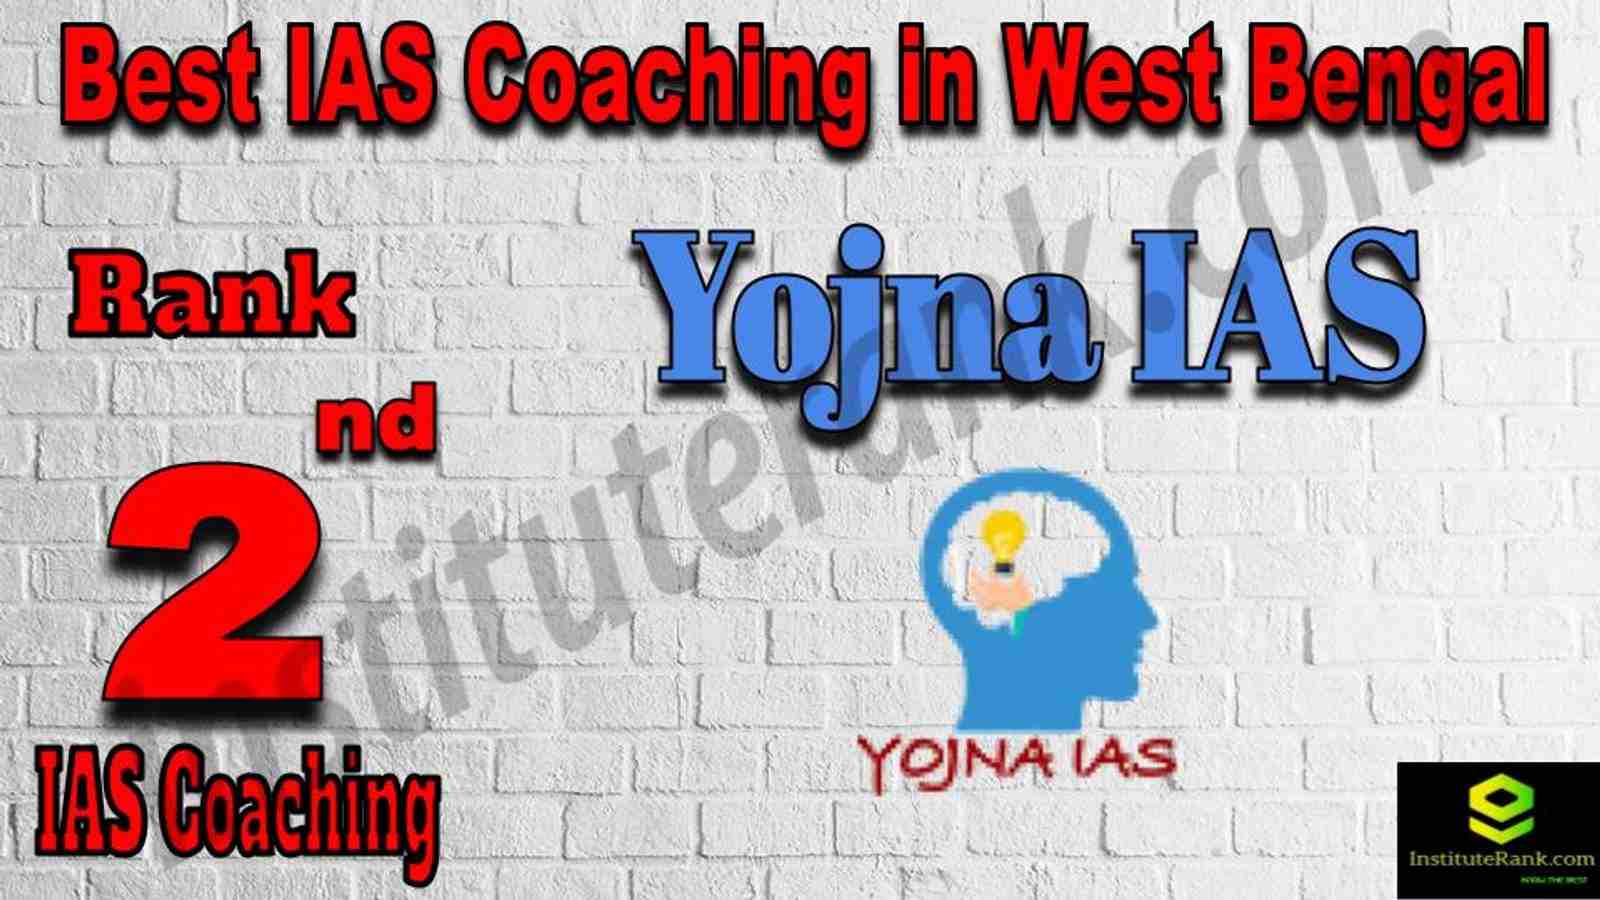 2nd Best IAS Coaching in West Bengal